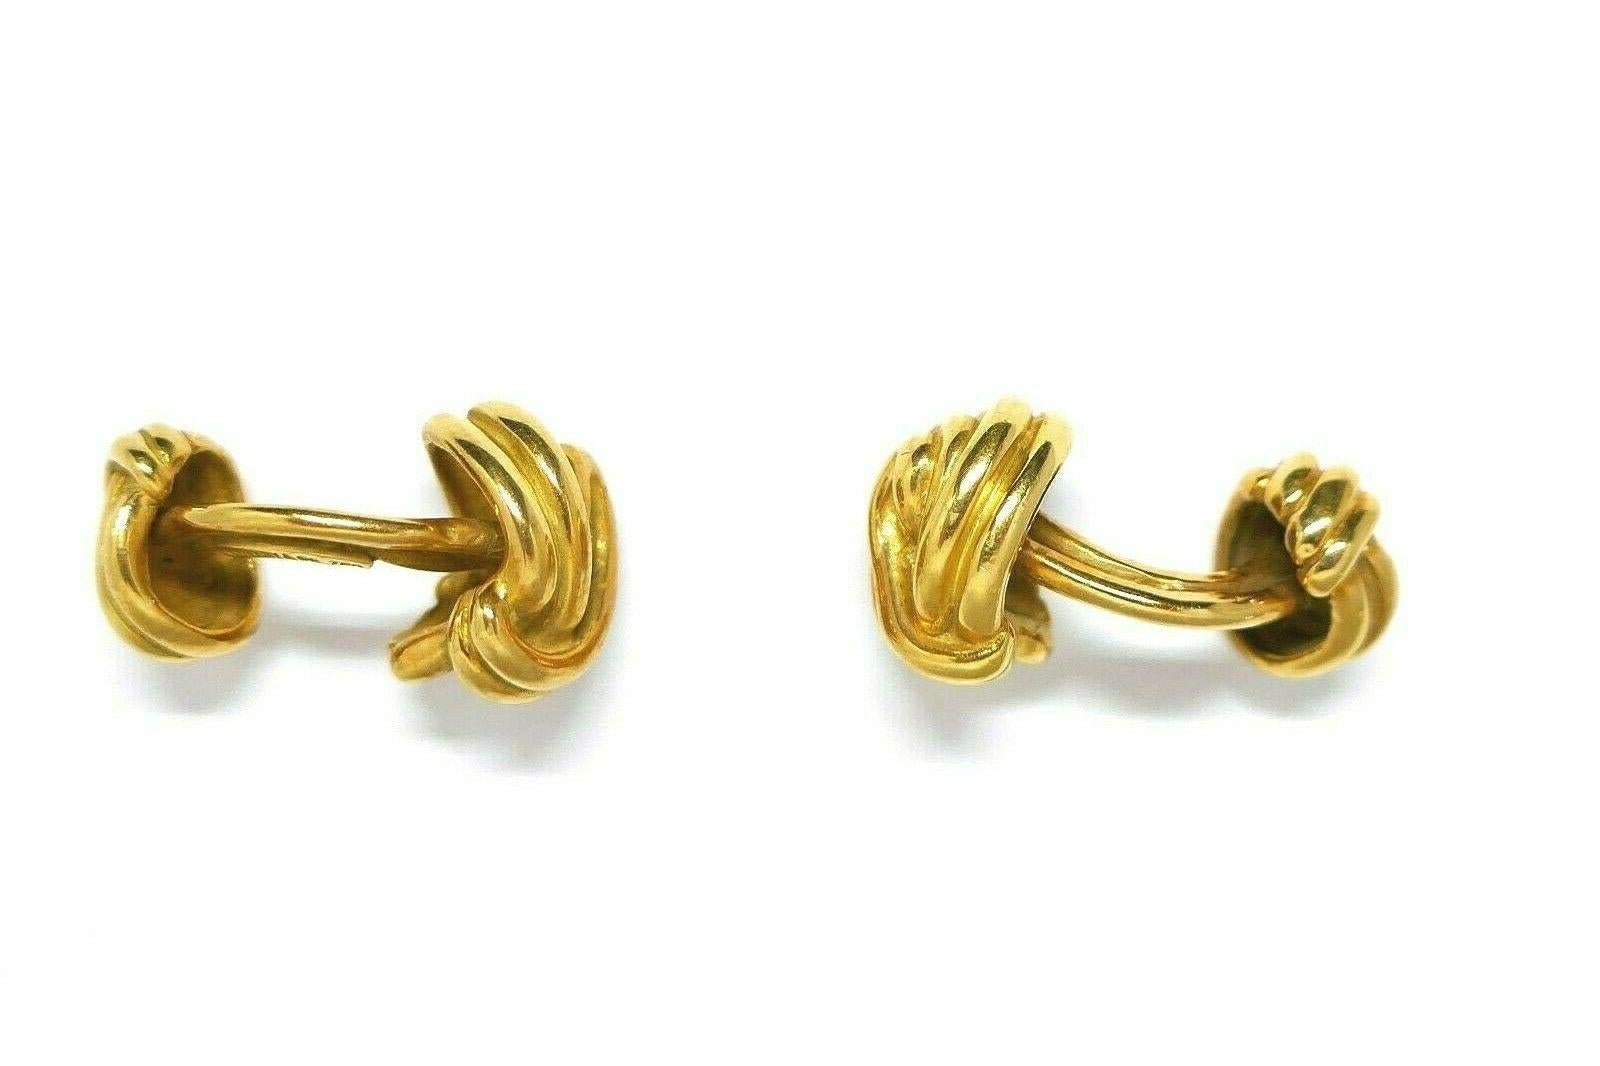 Elegant chunky minimalism from Tiffany&Co to enhance your style. These swirled knot cufflinks are made of 18k yellow gold and come with an original box.
Stamped with the Tiffany&Co makers mark and a hallmark for 18k gold.
Measurements: length is